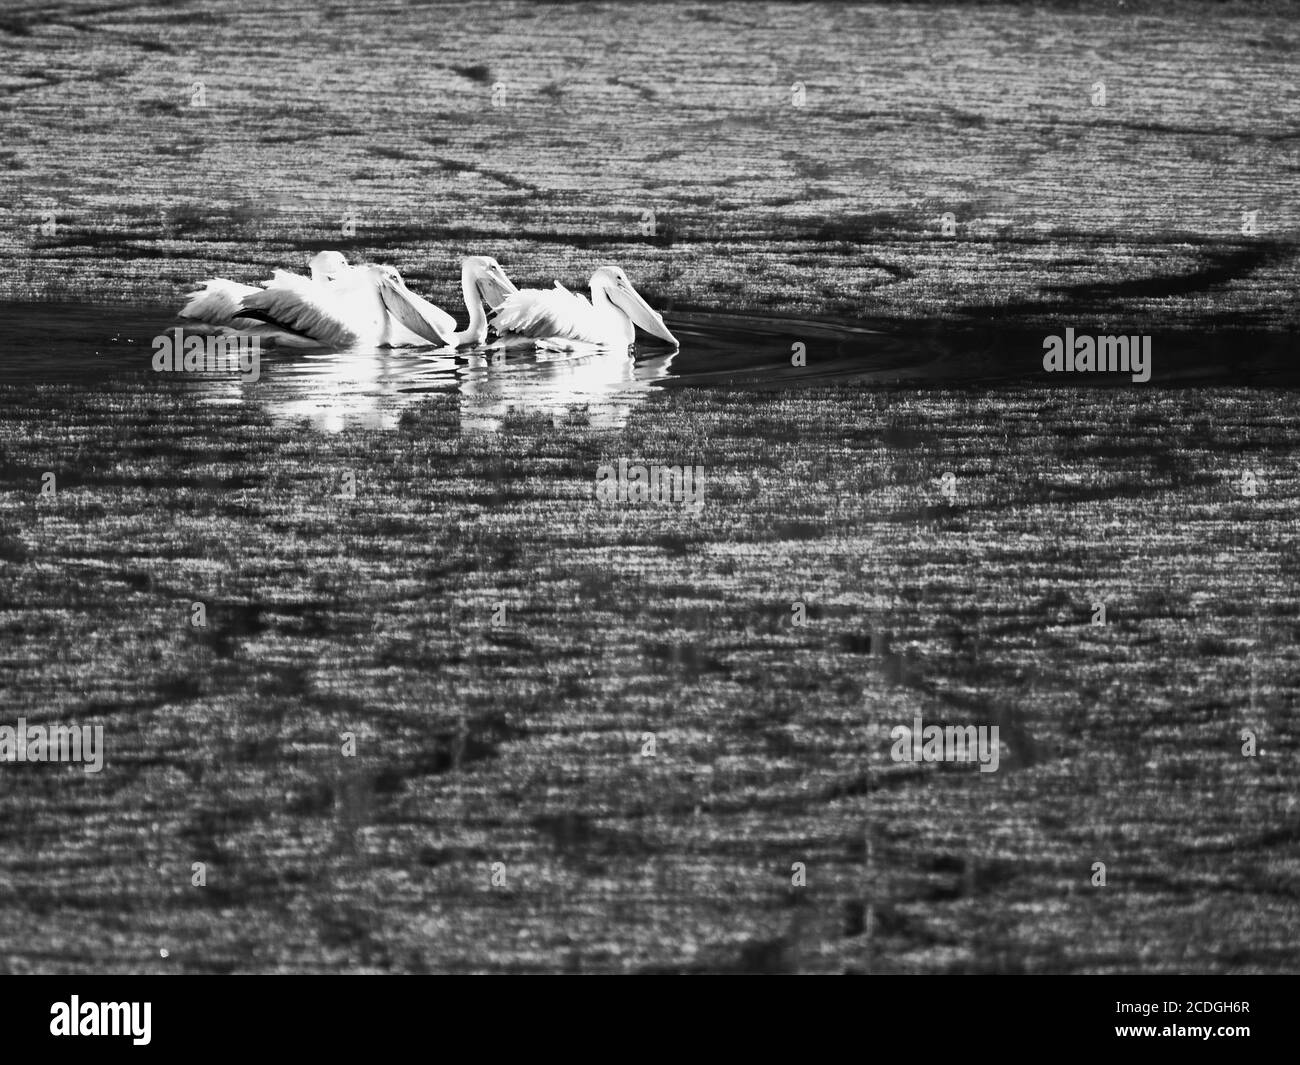 The Woodlands TX USA - 02-07-2020 - Great White Pelicans In Green Pond in B&W. Foto Stock